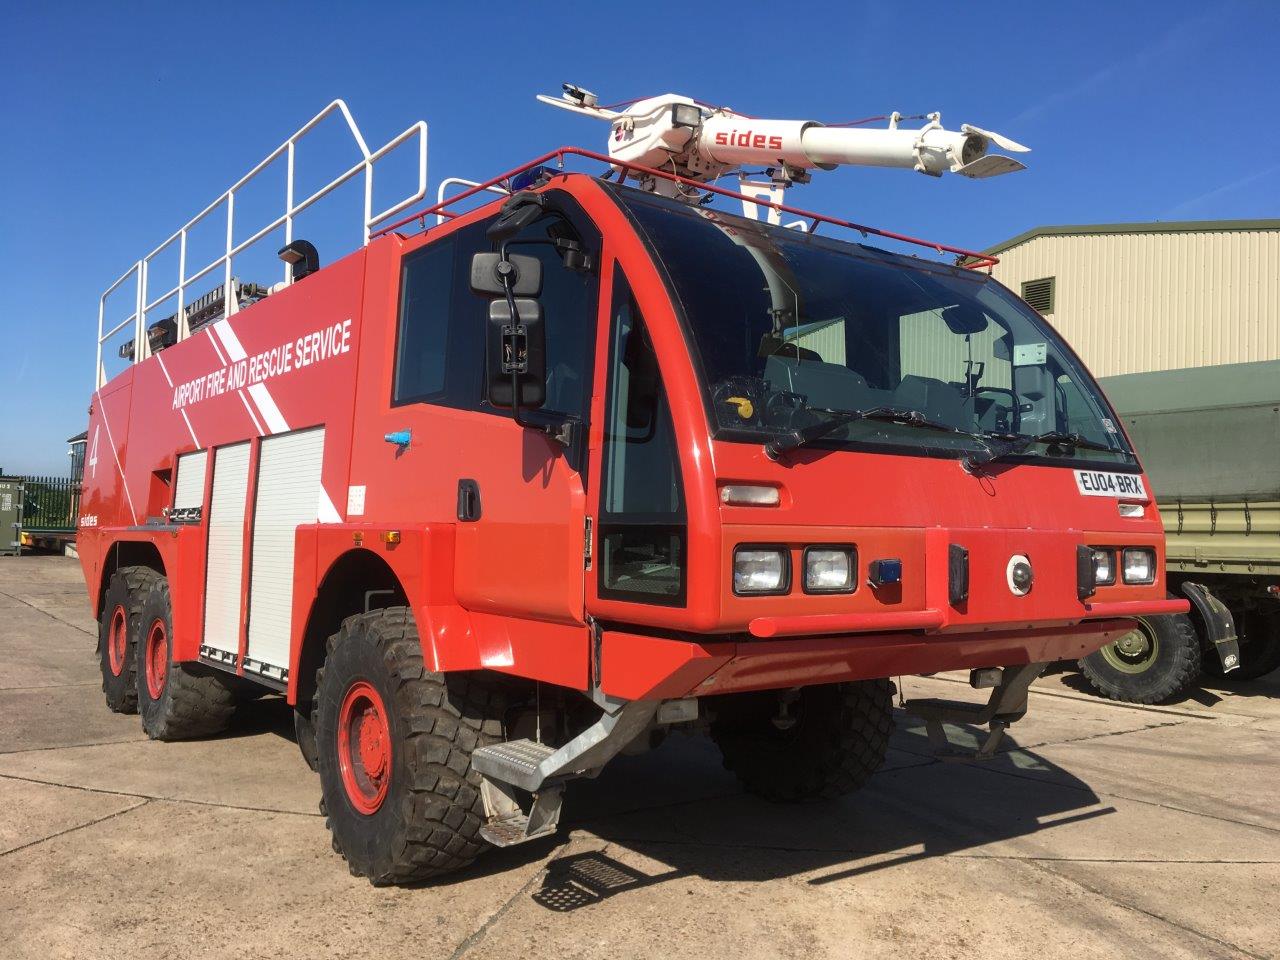 Sides VMA112 6x6 - Evems Limited - Good quality fire engines for sale